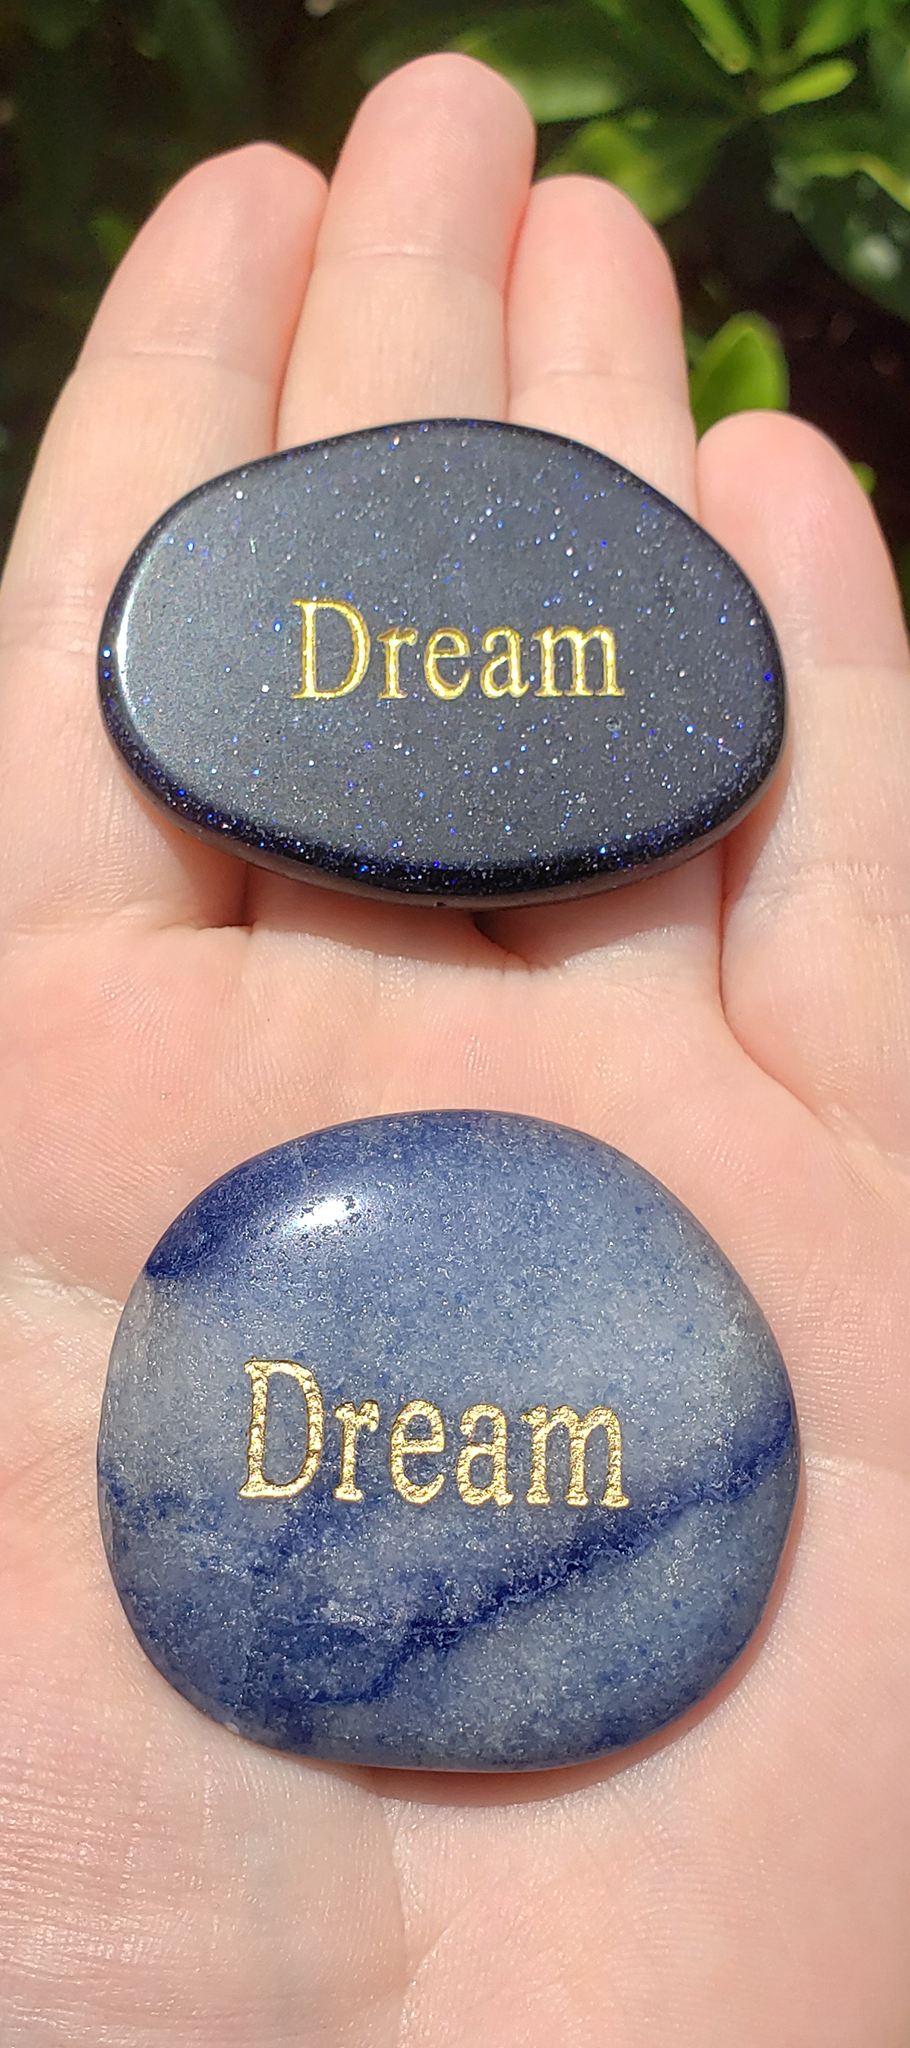 Gemstone "Dream" Affirmation Palm Meditation Stone - Intuitively Selected!